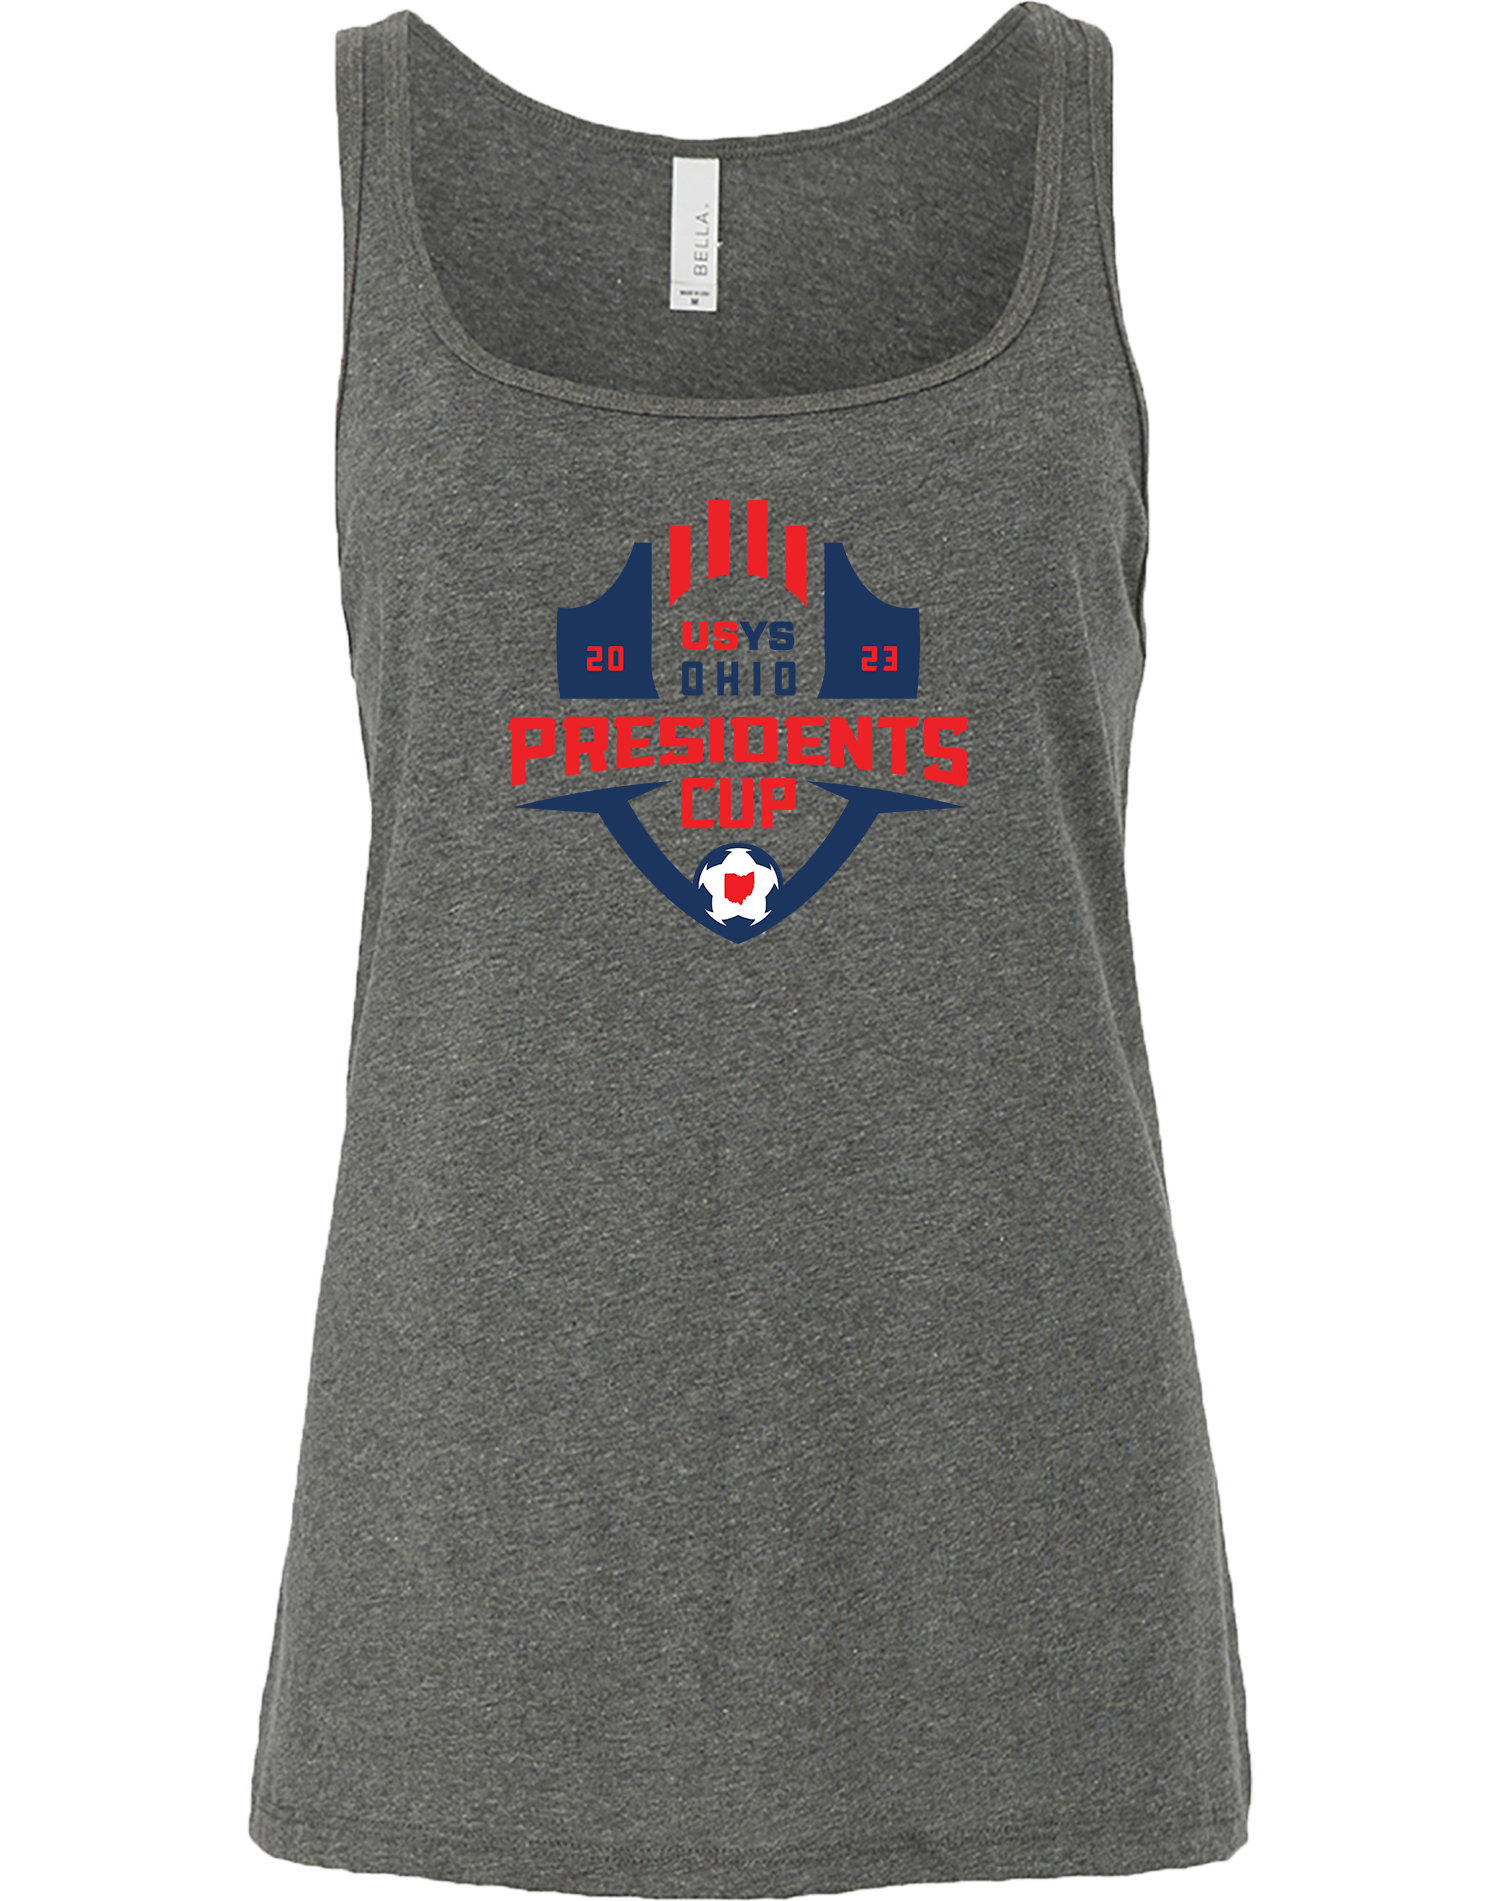 TANK TOP - 2023 USYS Ohio Presidents Cup